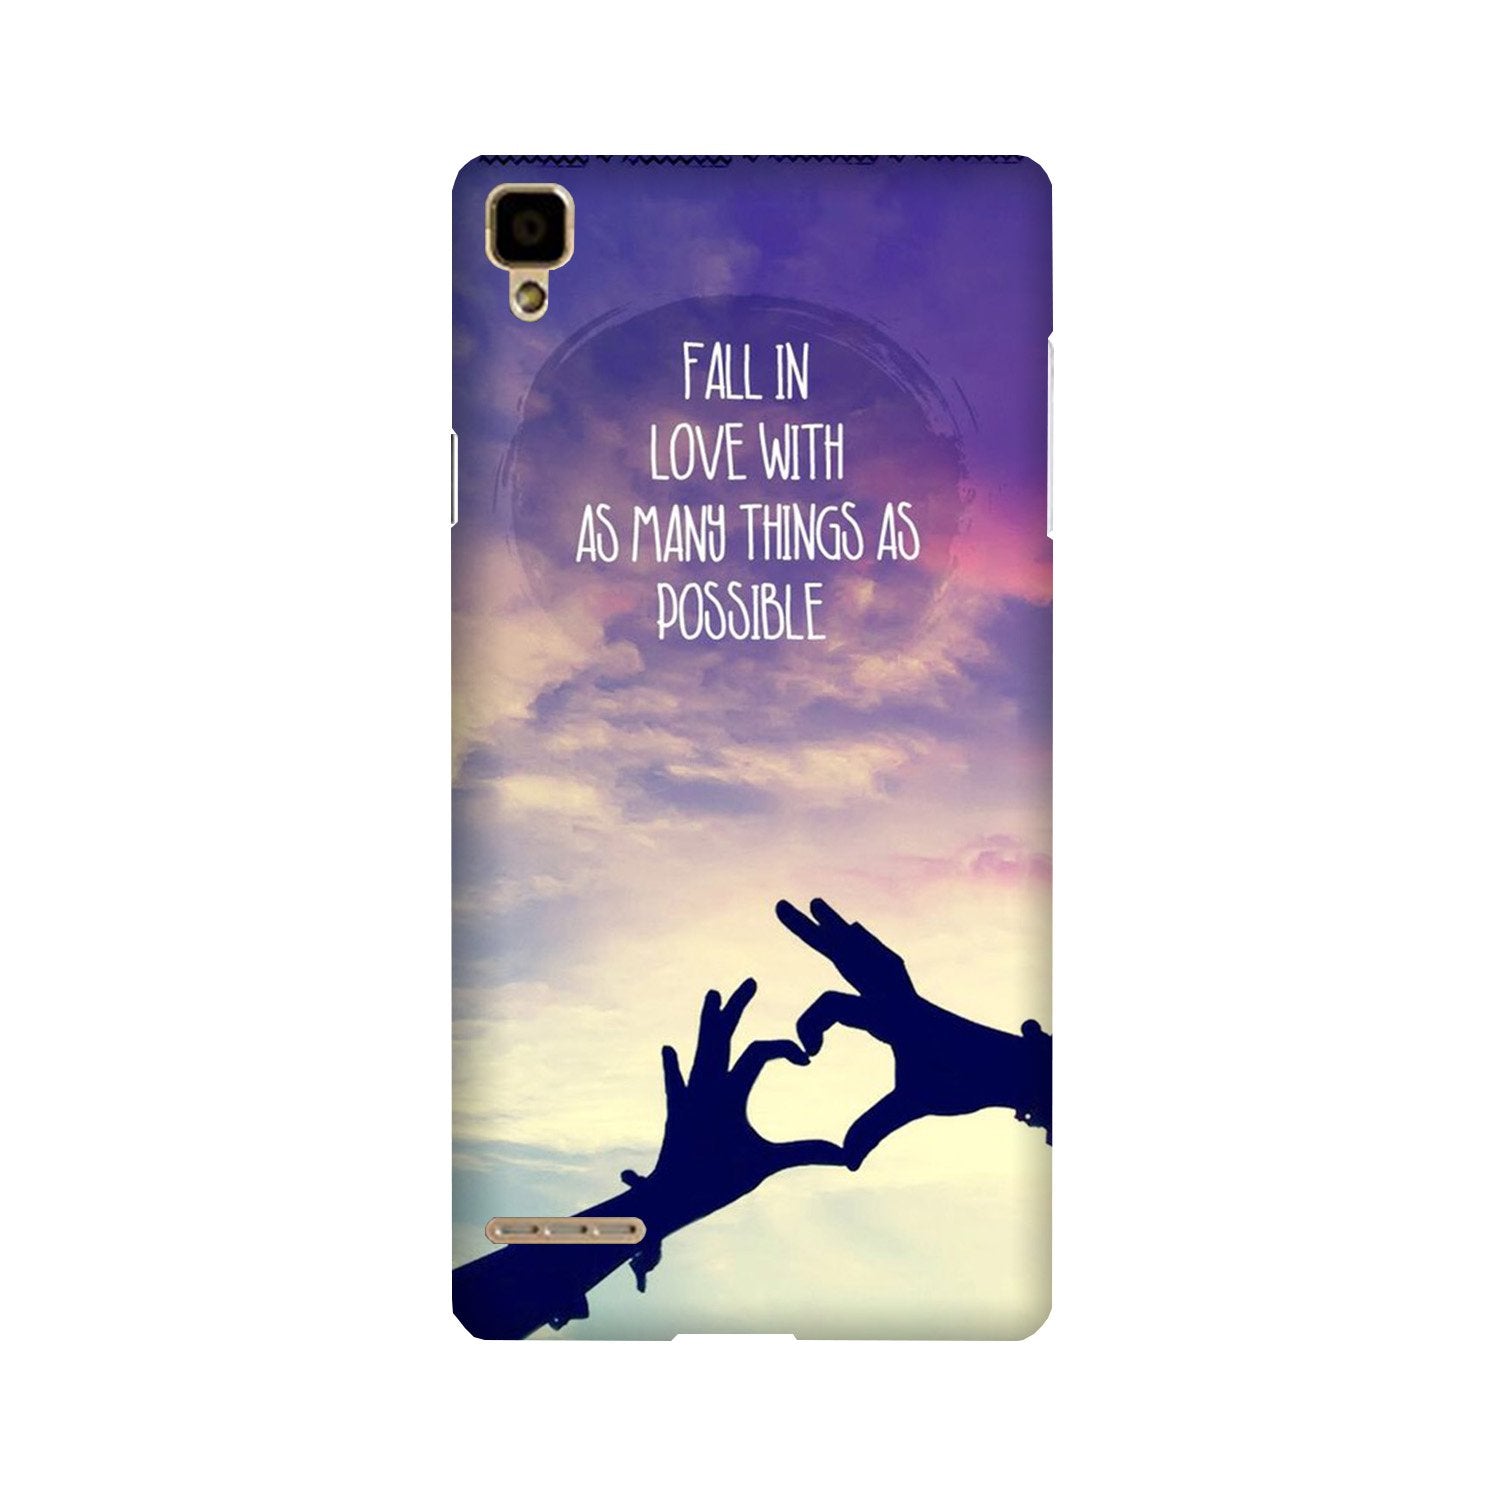 Fall in love Case for Oppo F1